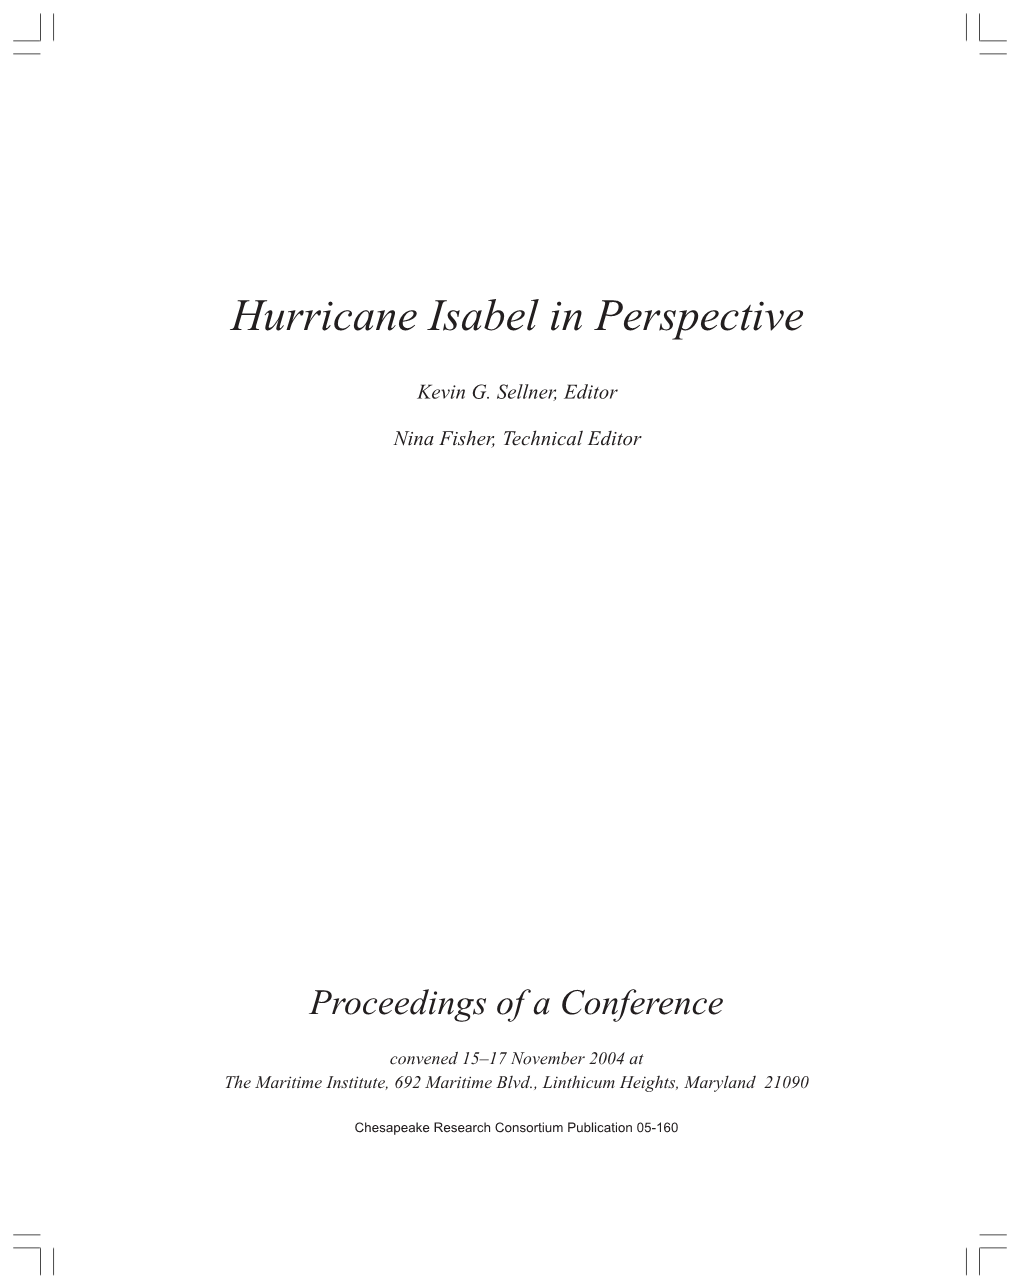 Hurricane Isabel in Perspective